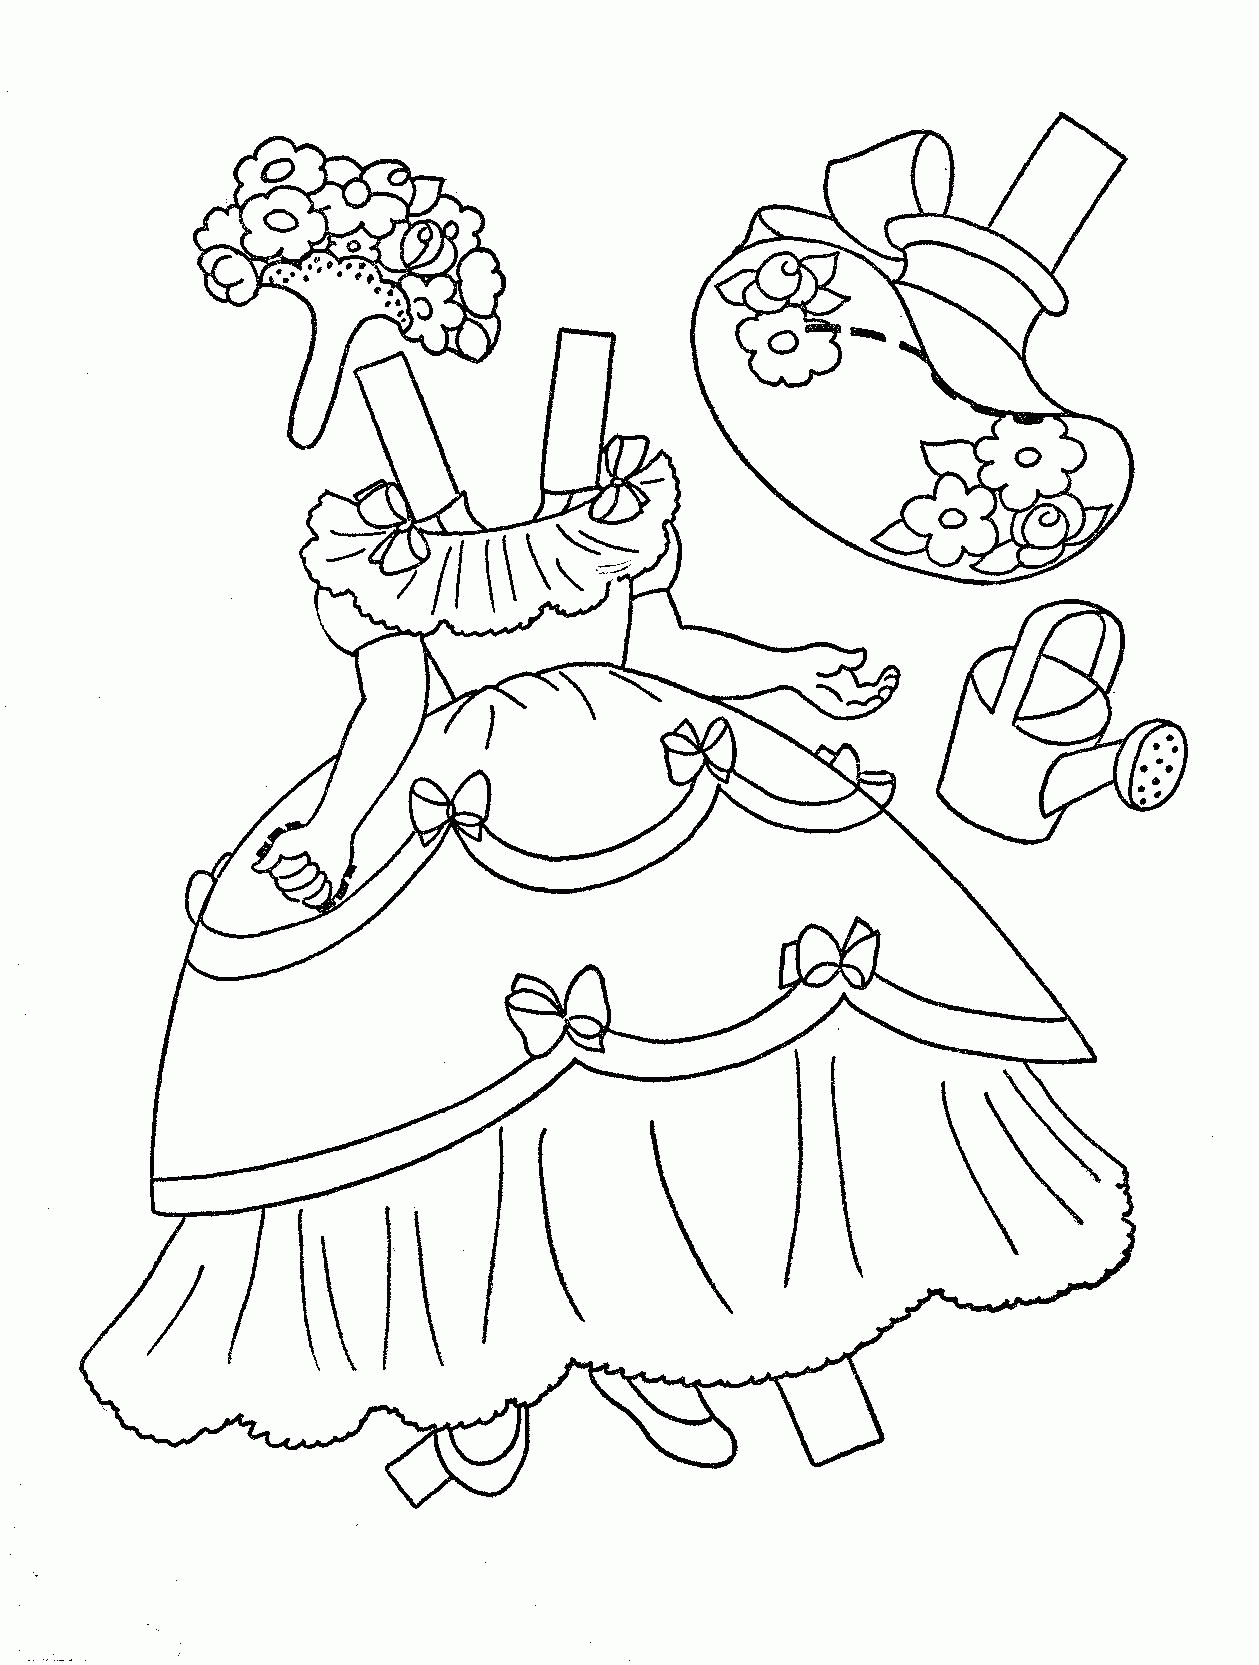 Mother Goose Coloring Book Pages: Vintage Mother Goose Coloring ...